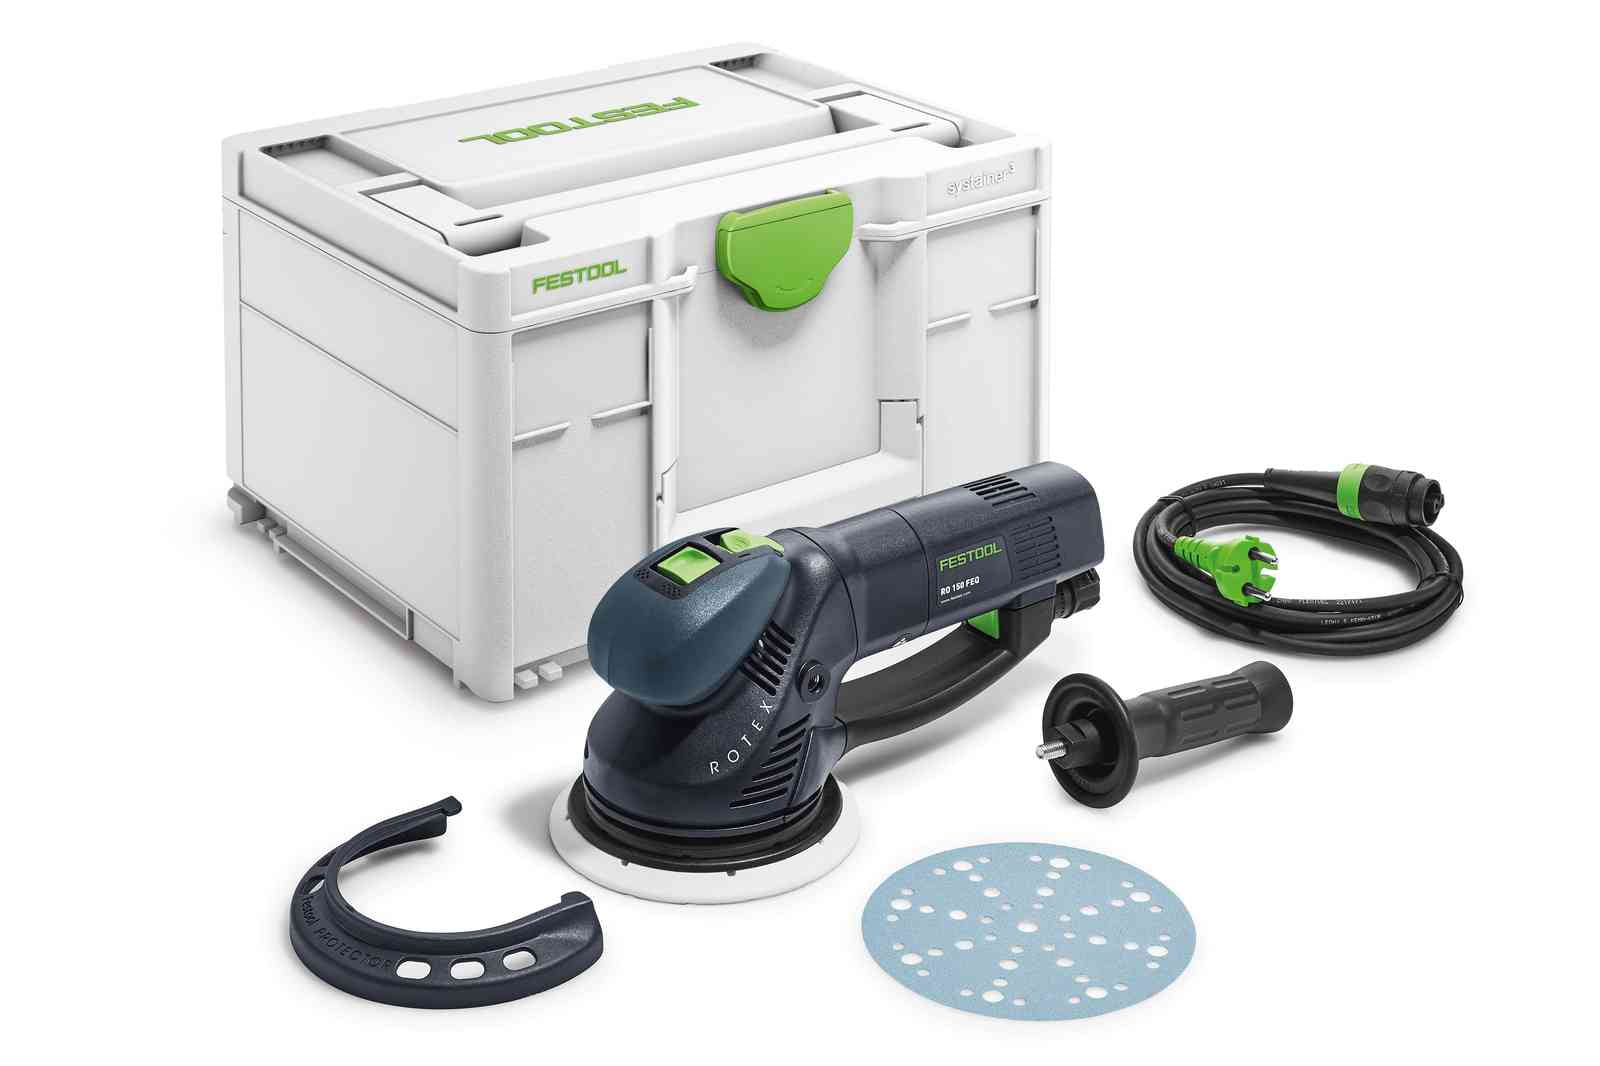 Festool Geared eccentric sander ROTEX RO 150 FEQ-Plus 576017 + Free SYS-STF D150 576785 Power Tool Services